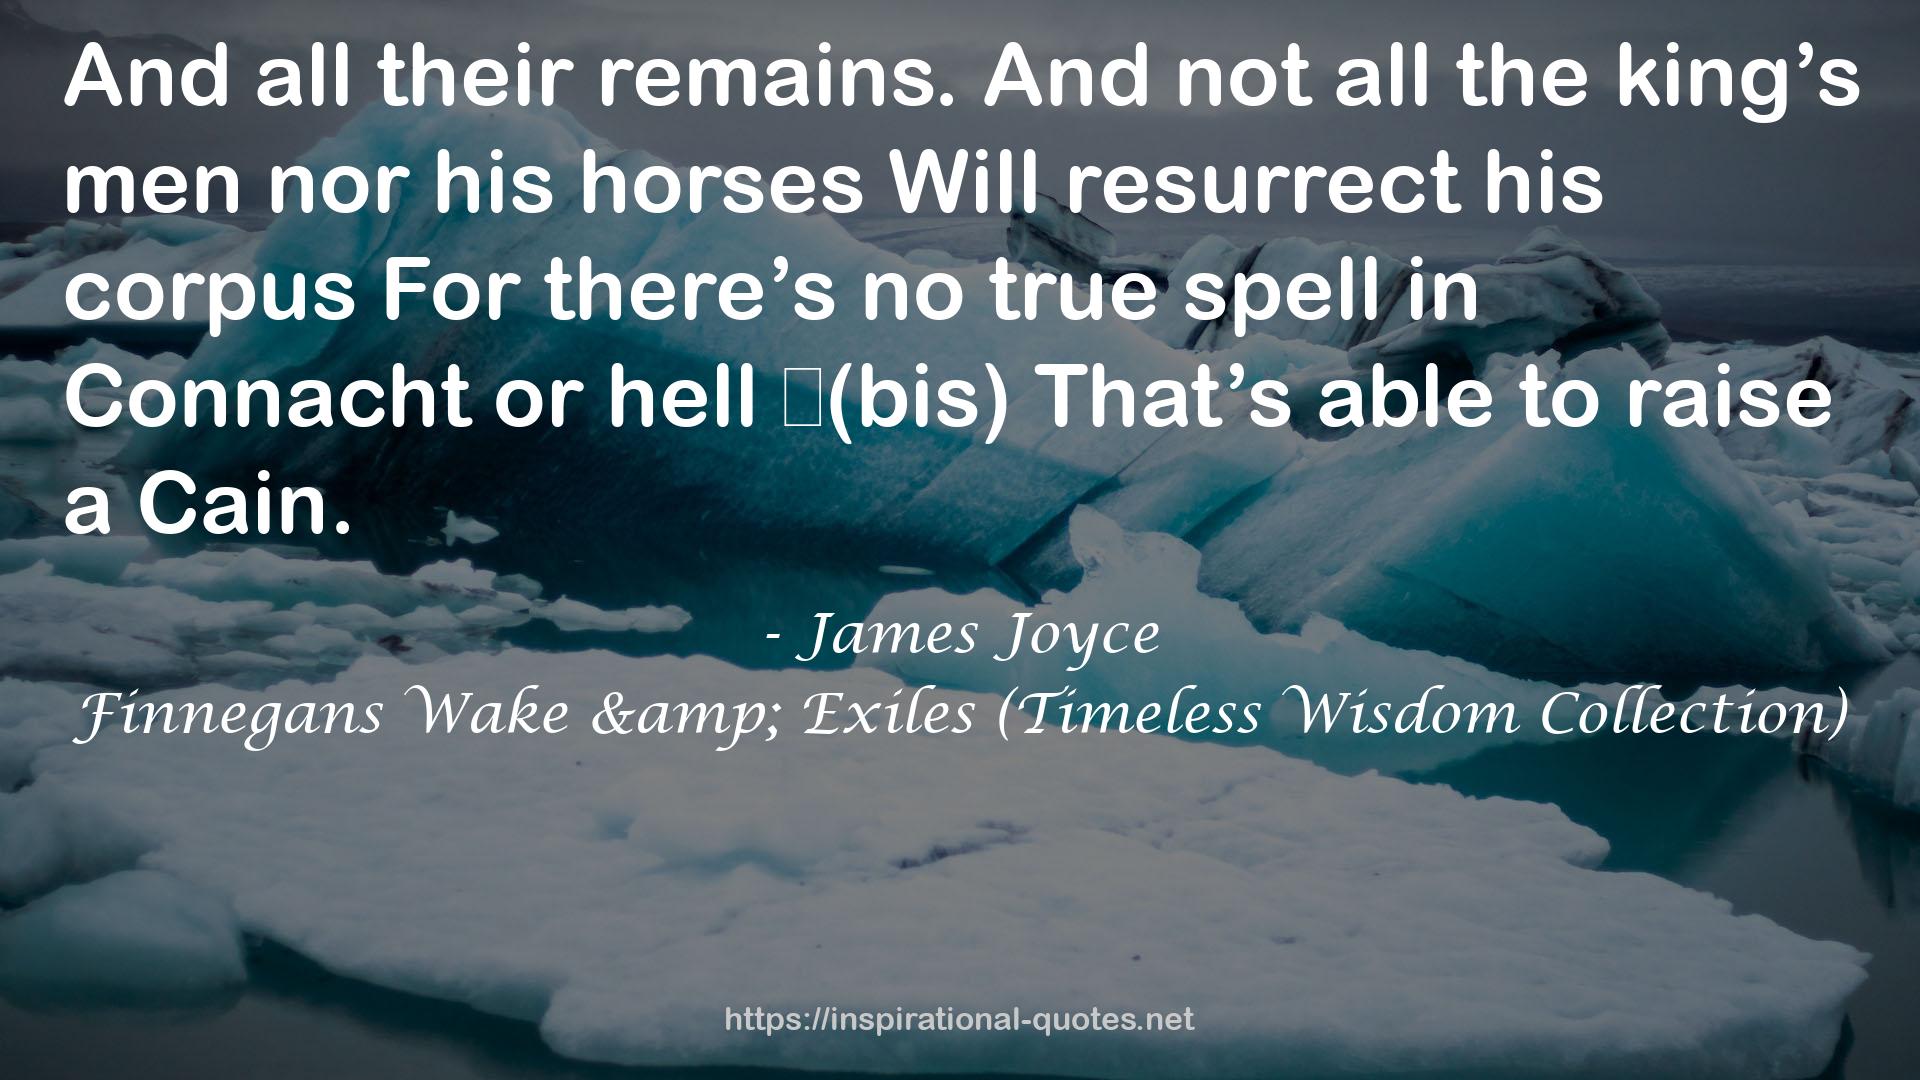 Finnegans Wake & Exiles (Timeless Wisdom Collection) QUOTES